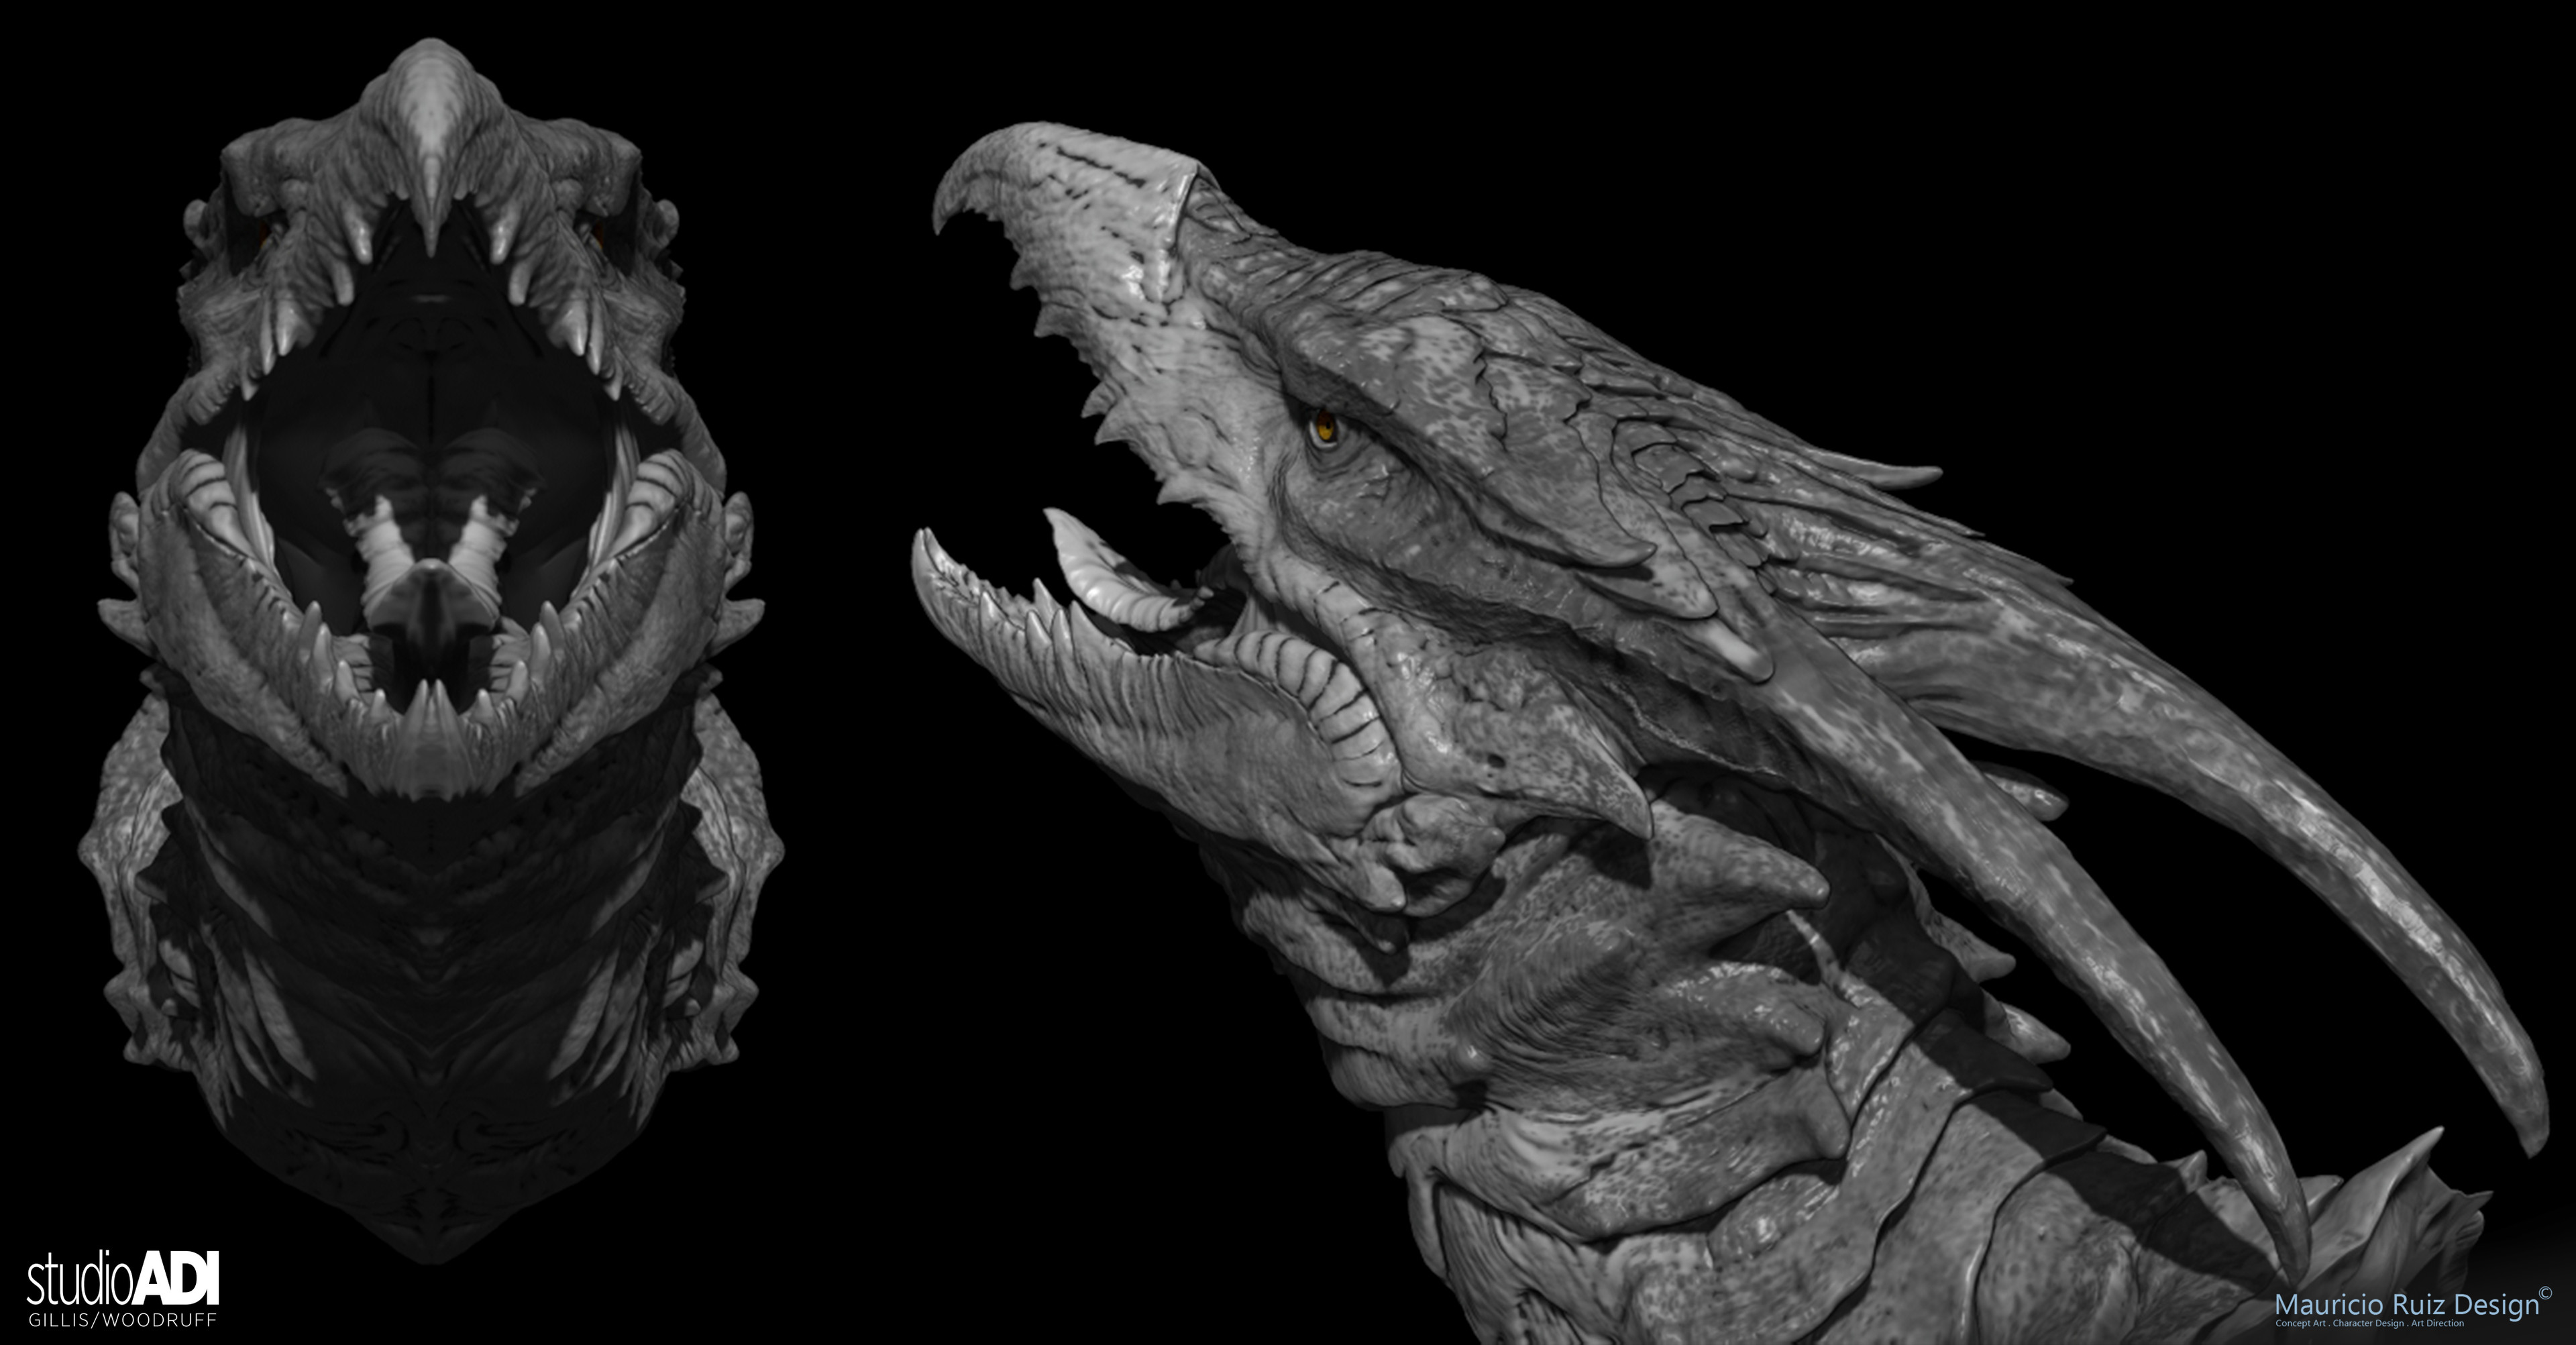 The following images show the Final sculpt for Rodan's head with Black &amp; White Polypaint color added in ZBrush.